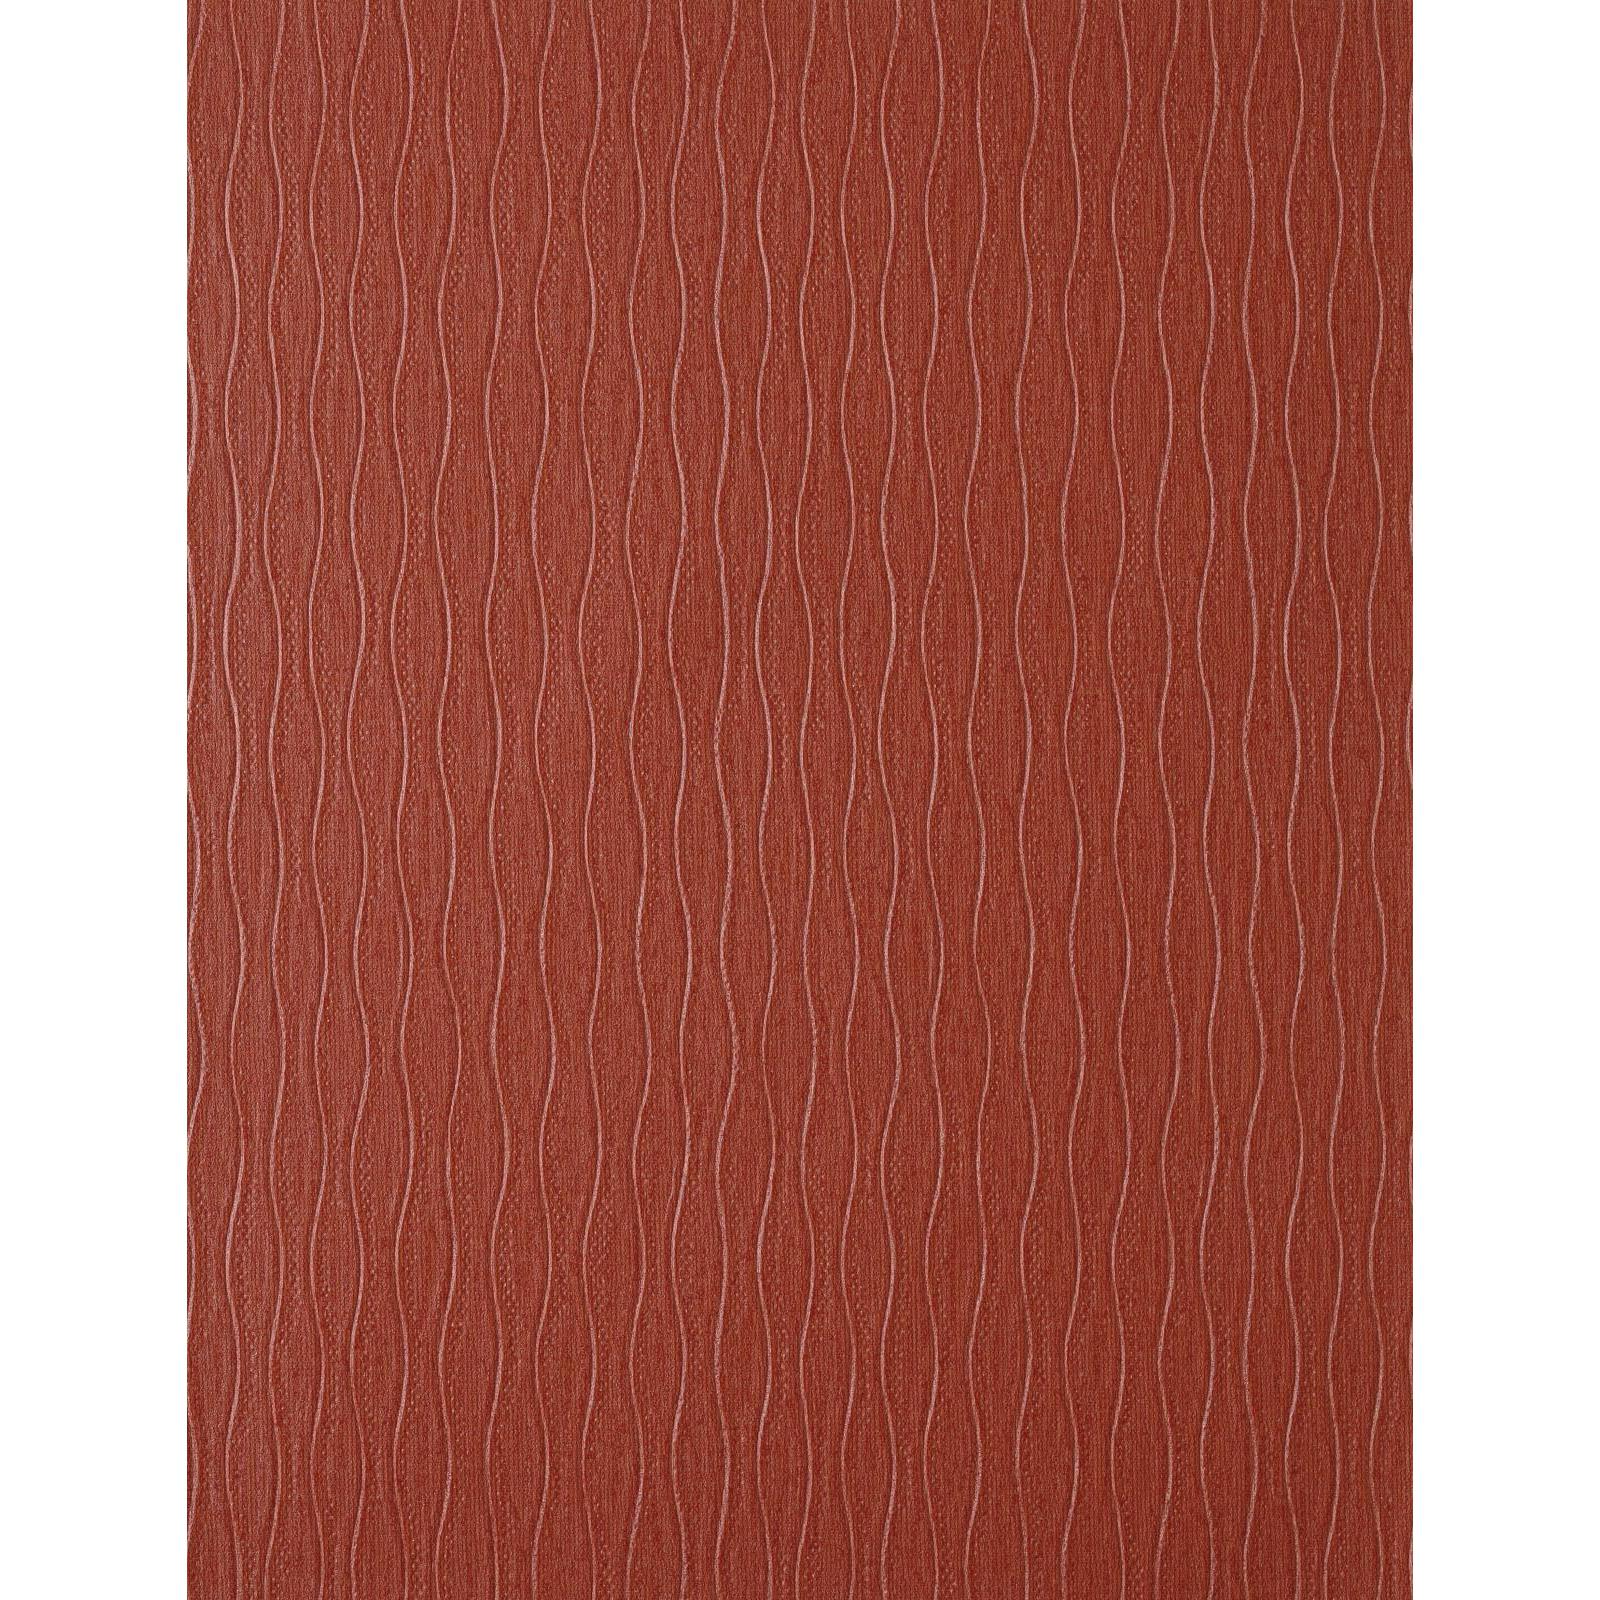 York Wallcoverings Decorative Finishes Vertical Waves Wallpaper